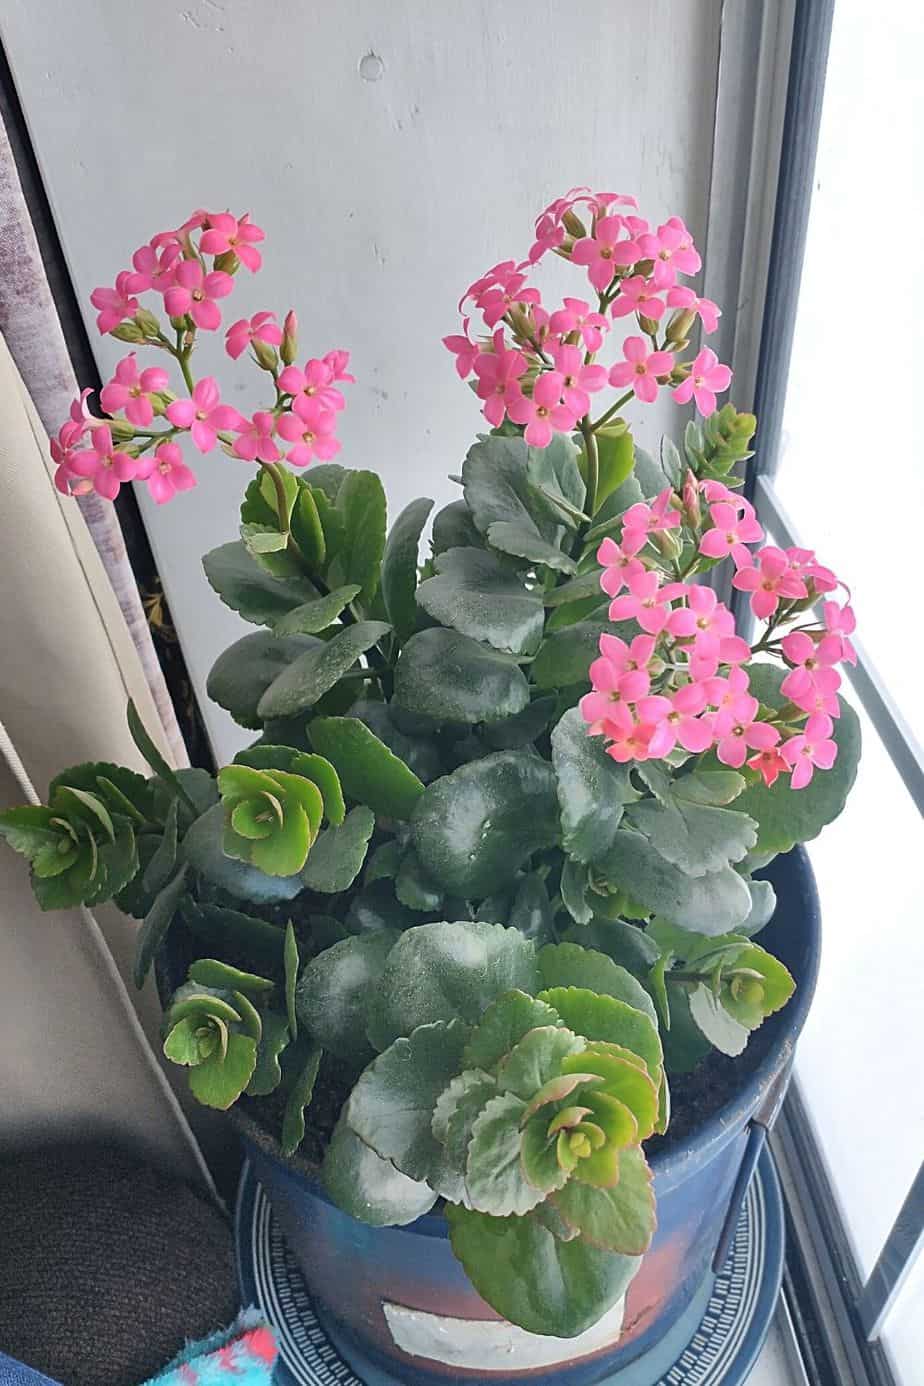 Despite the stunning flowers that Kalanchoe grows, it is toxic for cats